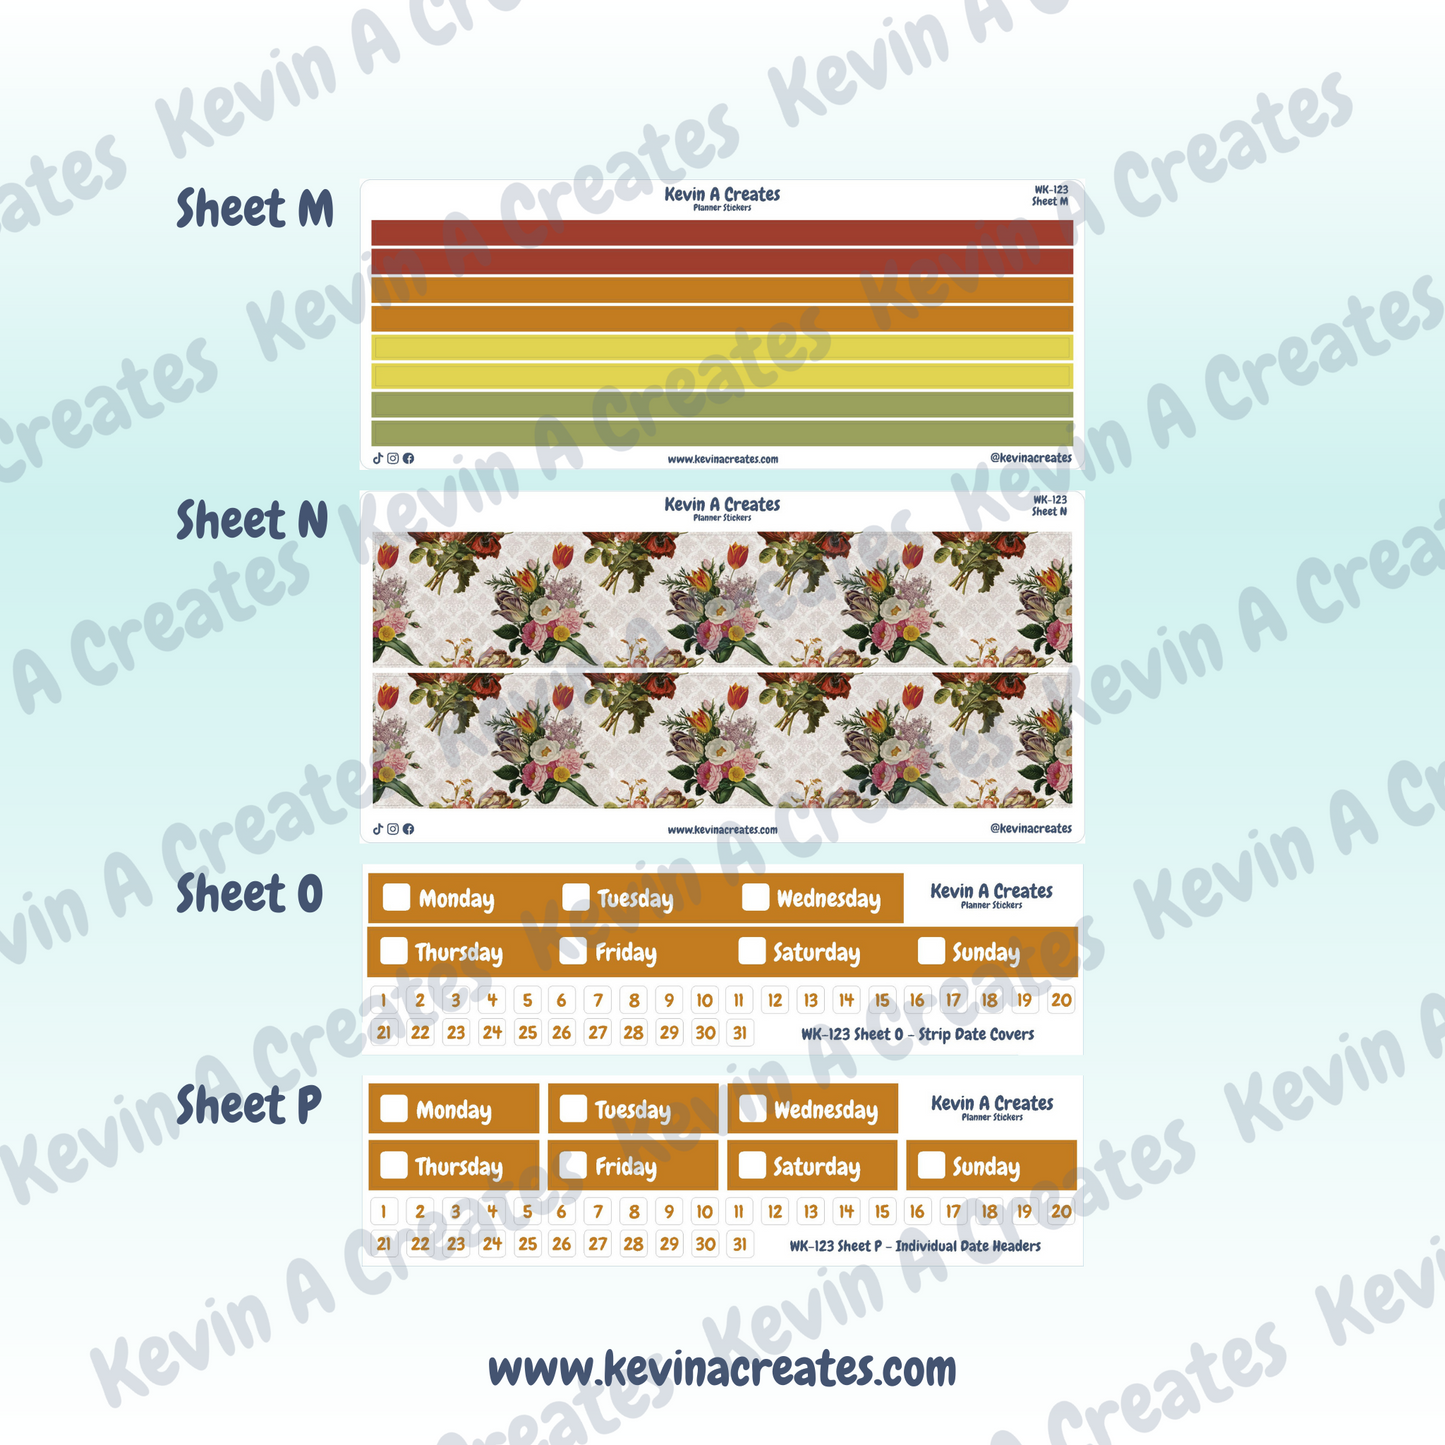 WK-123, Weekly Planner Stickers, Vertical Layout